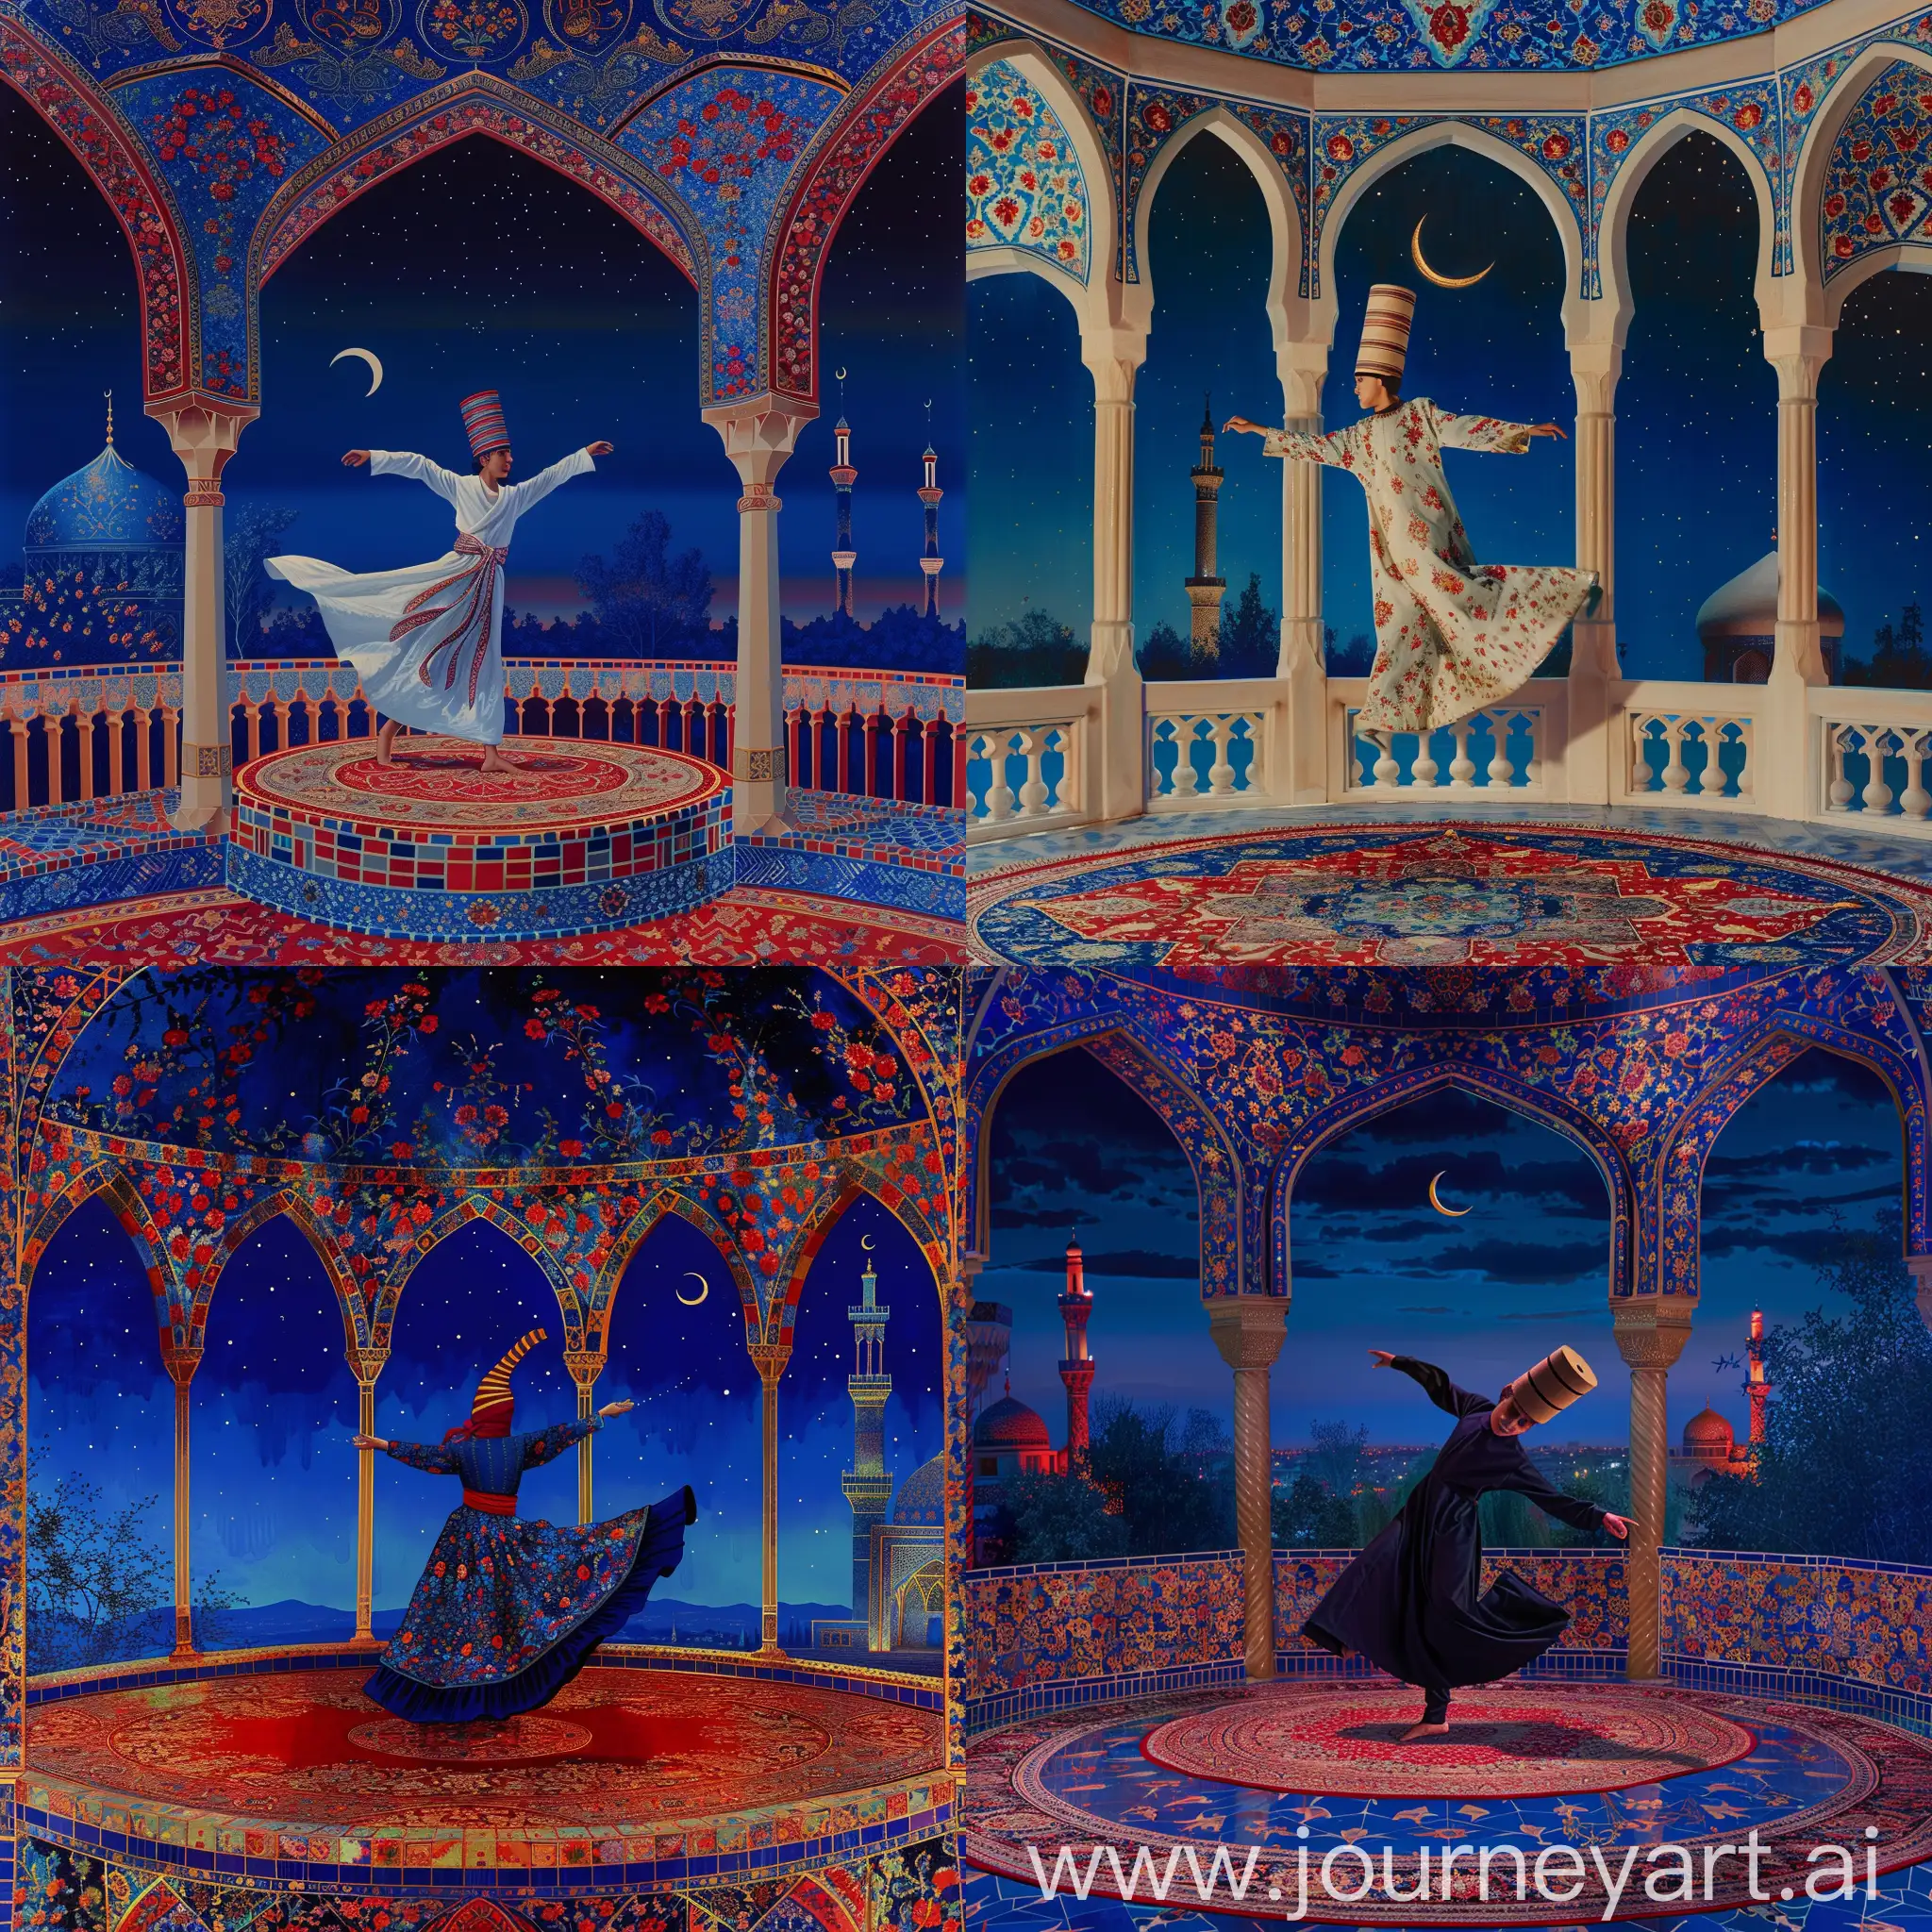 A youth British dervish wearing cylindrical fez cap performing sufi whirling sema dance on a persian carpet, inside an octagonal balcony having three arches decorated with red blue gold persian floral motifs, serene night sky with a crescent, view of Persian tiled mosque having red blue floral decorations, blue red golden composition --v 6 --ar 2:3 --sref https://cdn.discordapp.com/attachments/1213041174428782623/1246562622023667812/IMG_20240326_220808.png?ex=665ed1a9&is=665d8029&hm=6f1f1e5aecf9df059ce5f3d1854b2b16f6bc230019908a9c600a623016147b28& --style raw